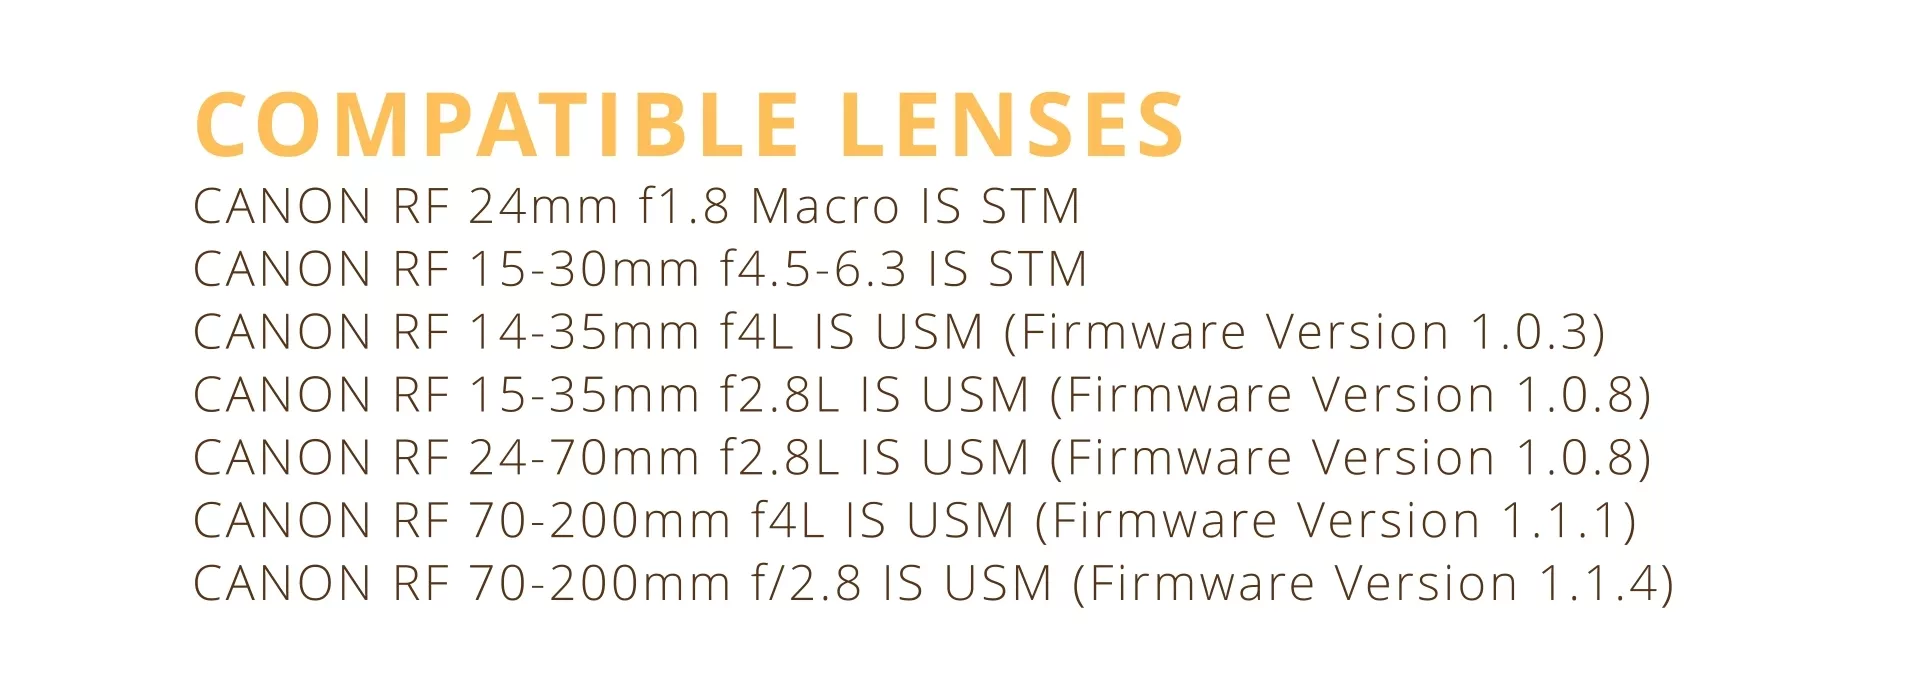 Compatible lenses with the canon r6 mii